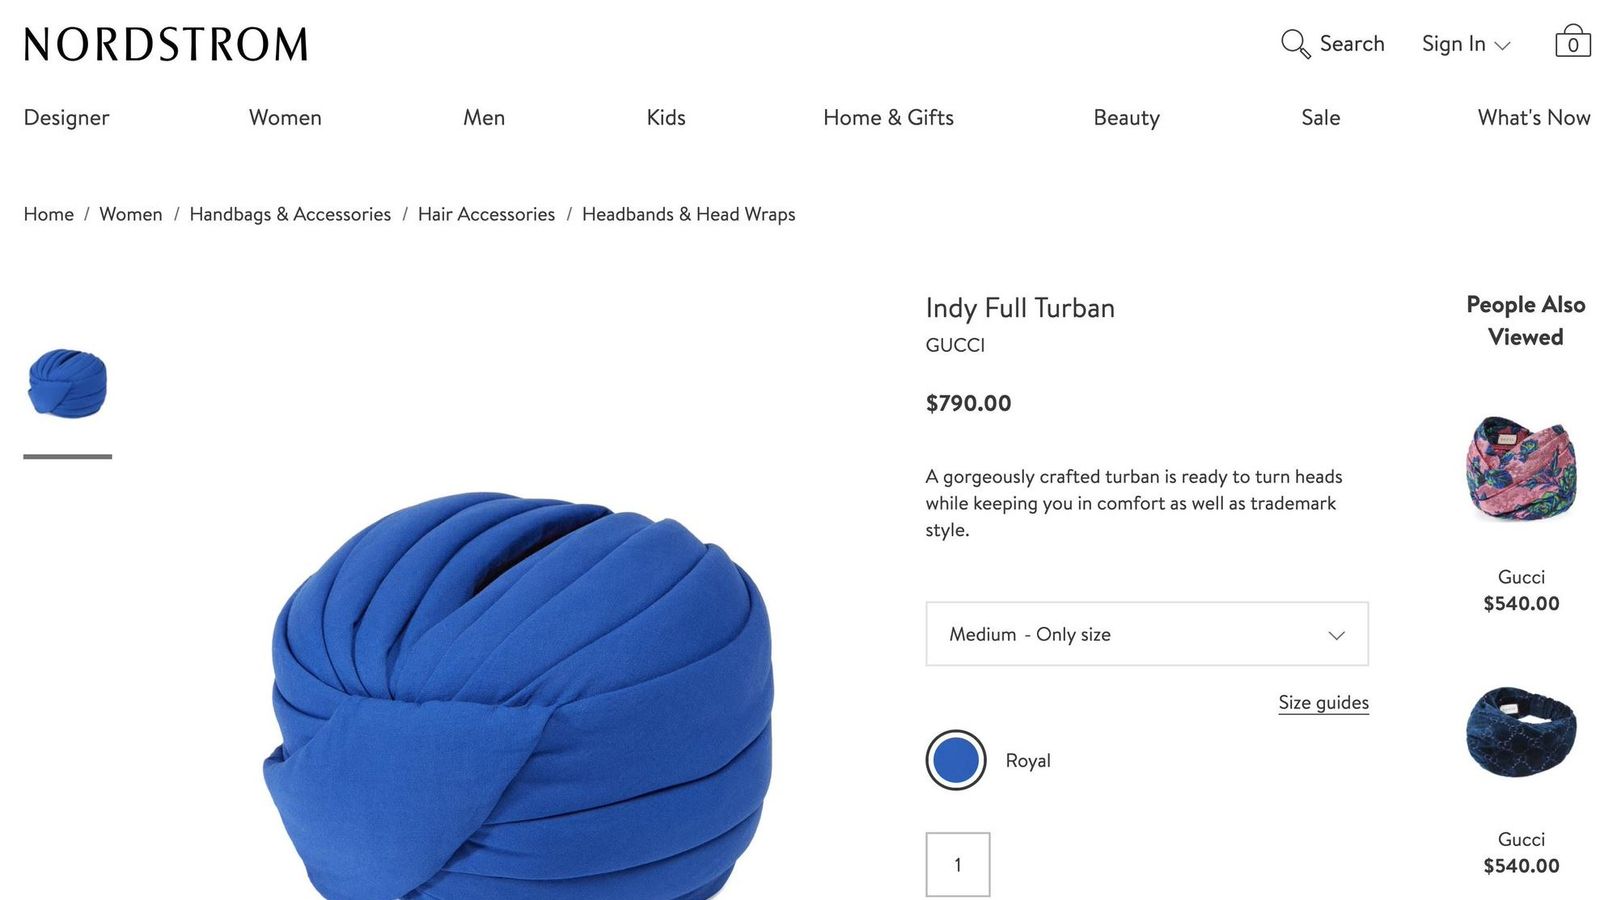 Gucci accused of appropriation' for selling £600 turban | US | Sky News